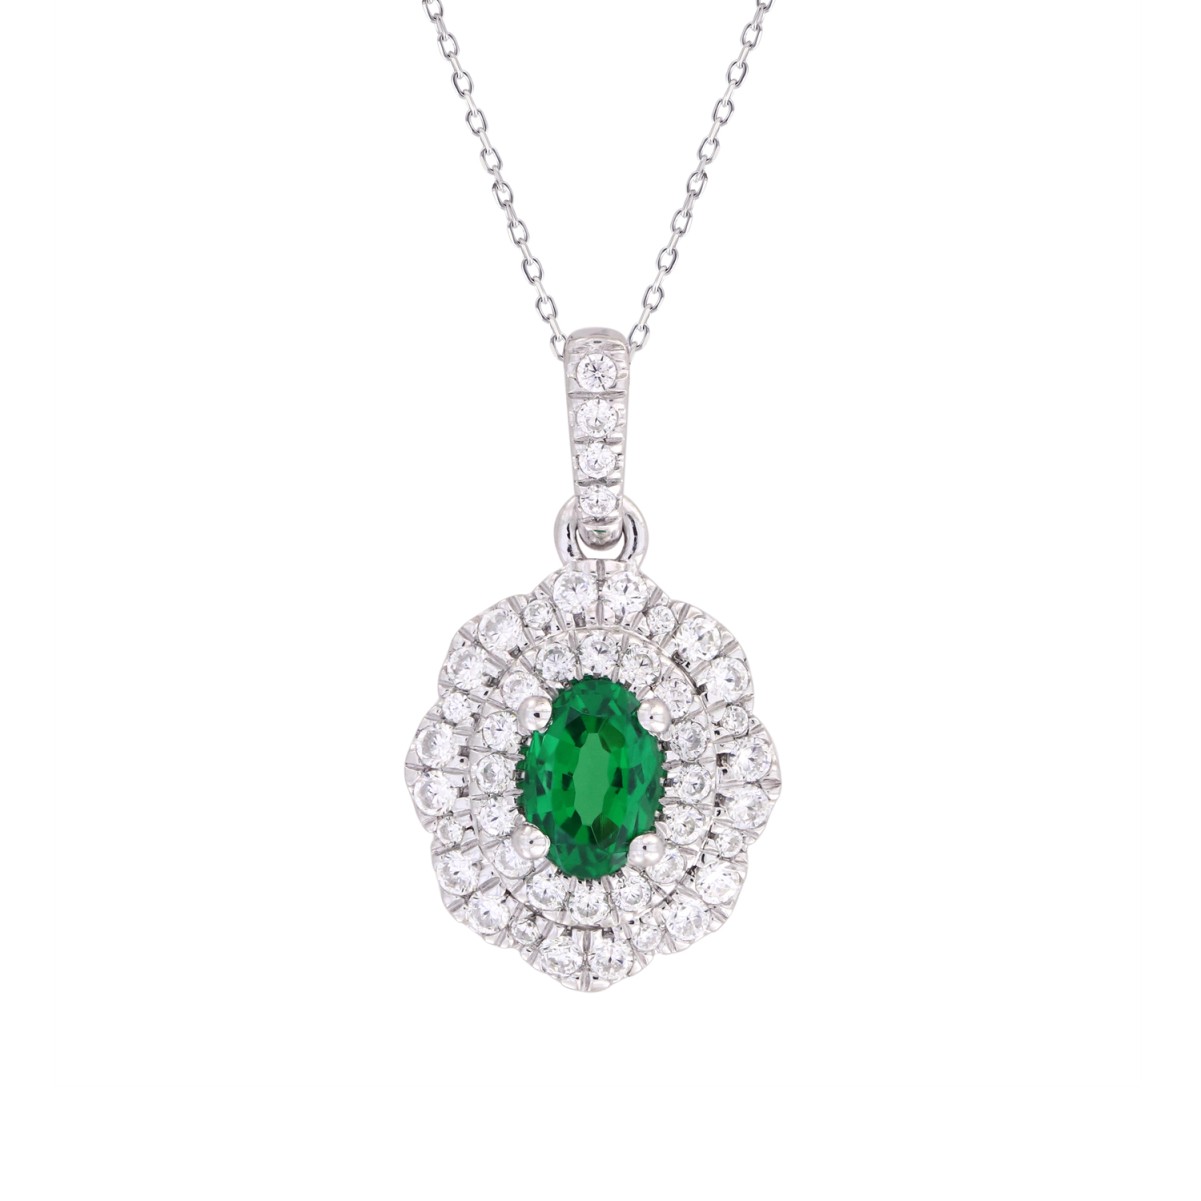 18K WHITE GOLD 3/4CT ROUND/OVAL DIAMOND LADIES PENDANT WITH CHAIN(COLOR STONE OVAL GREEN EMERALD DIAMOND 3/8CT)